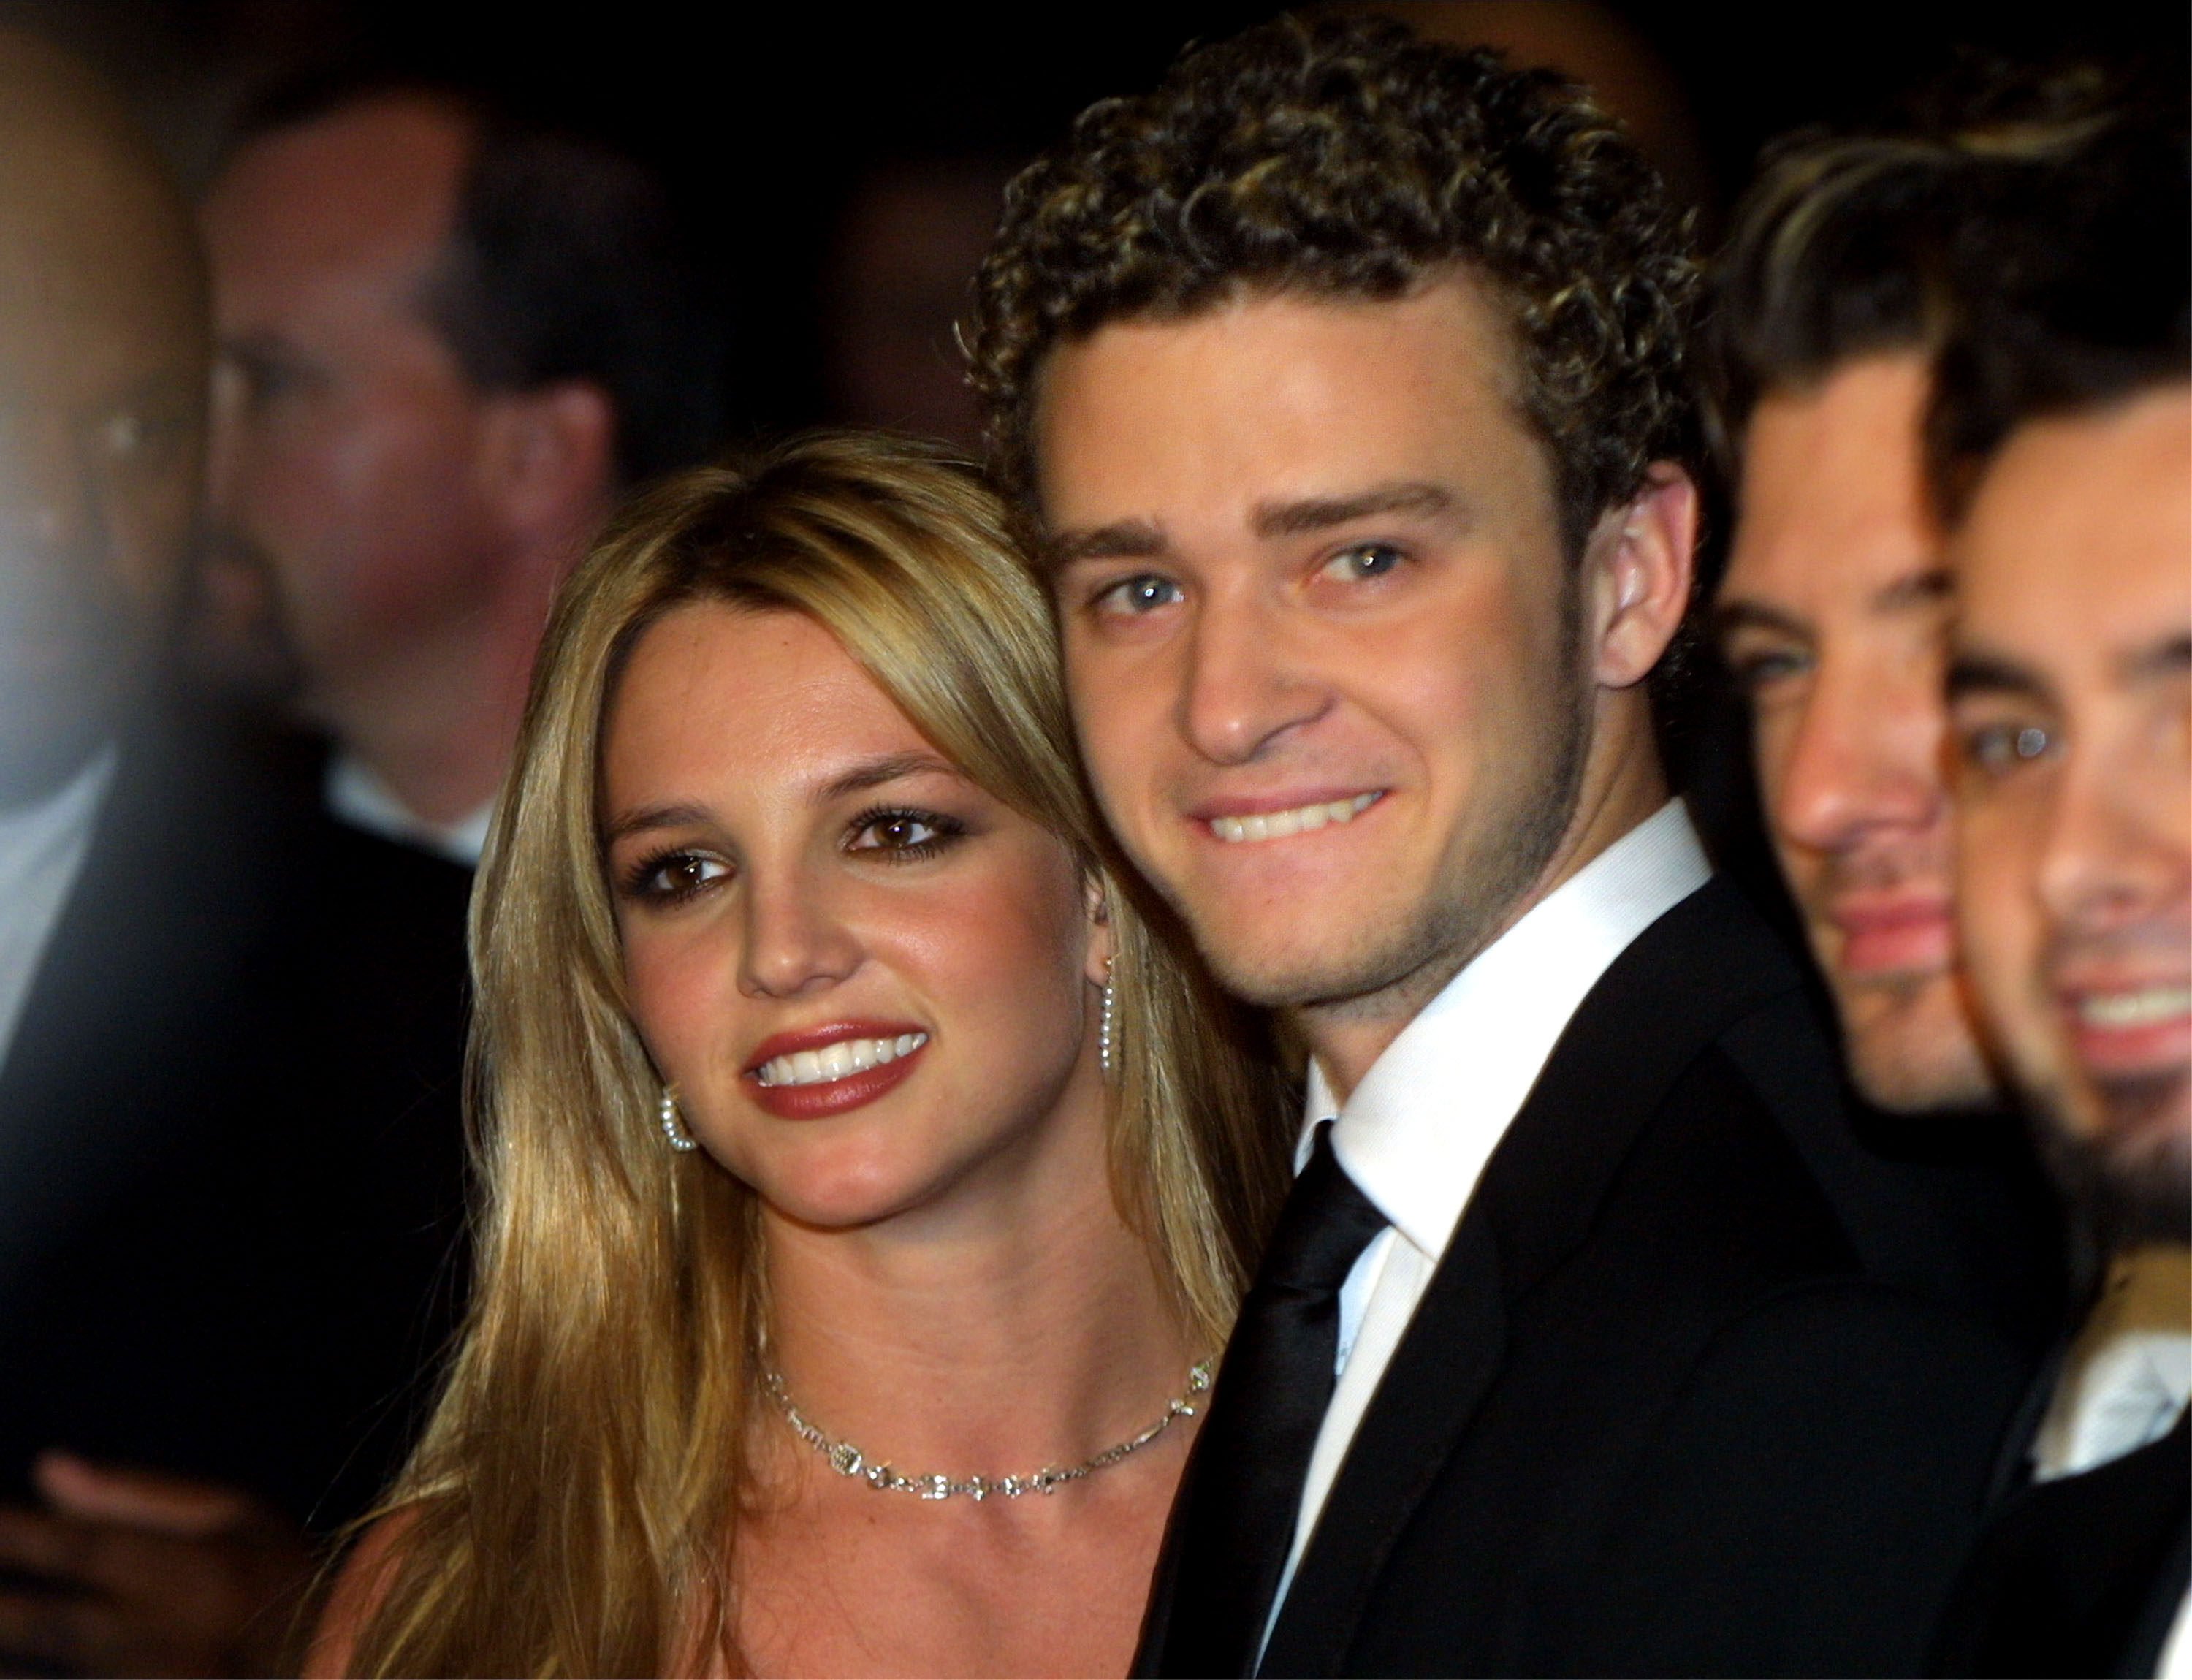 Pop singer Britney Spears and then-boyfriend Justin Timberlake once shared a tumultuous relationship. Photo: Getty Images